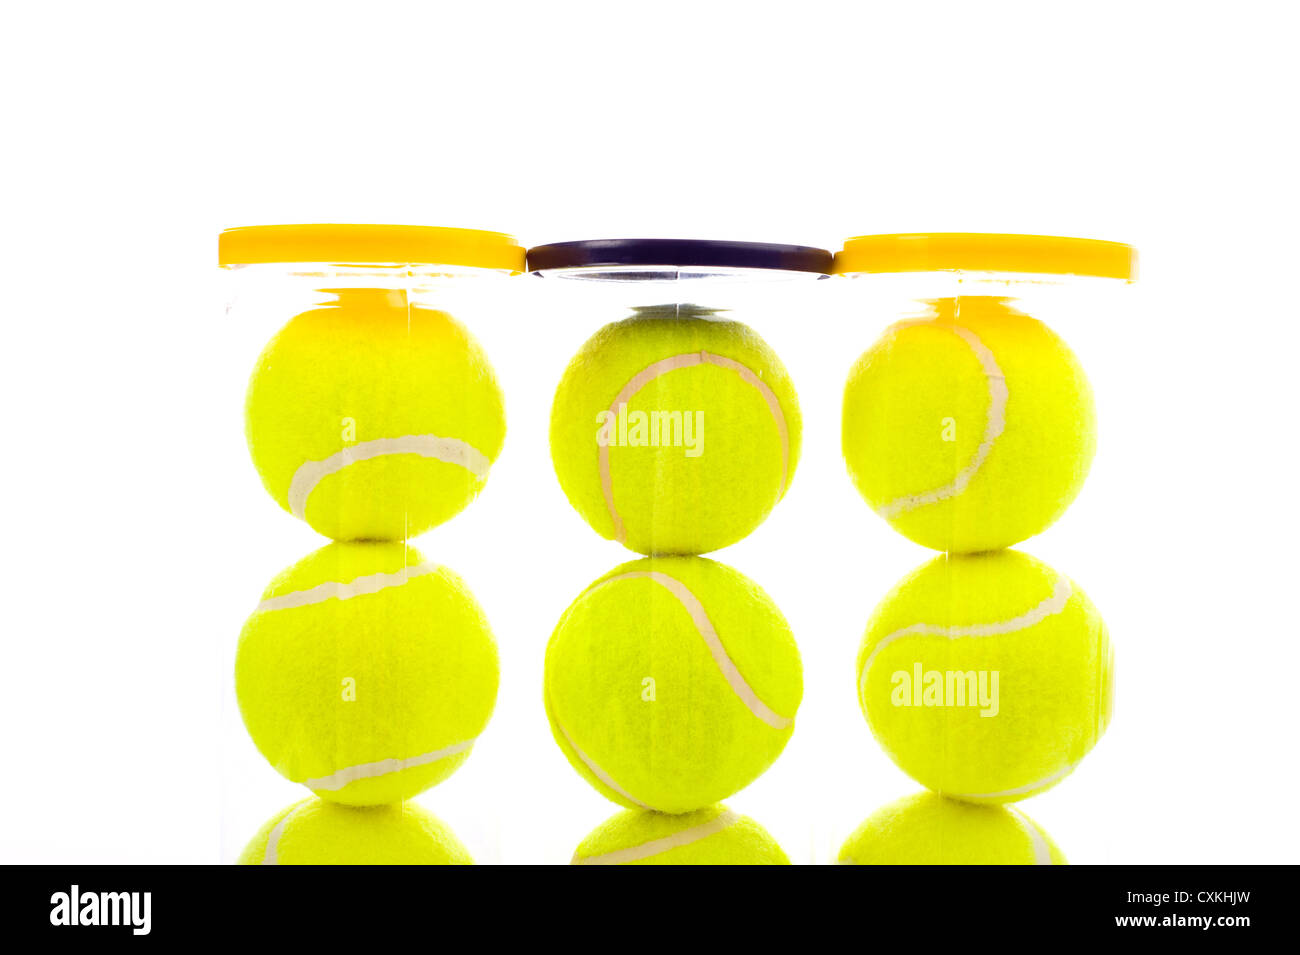 Several tennis balls on a white background with copy space Stock Photo